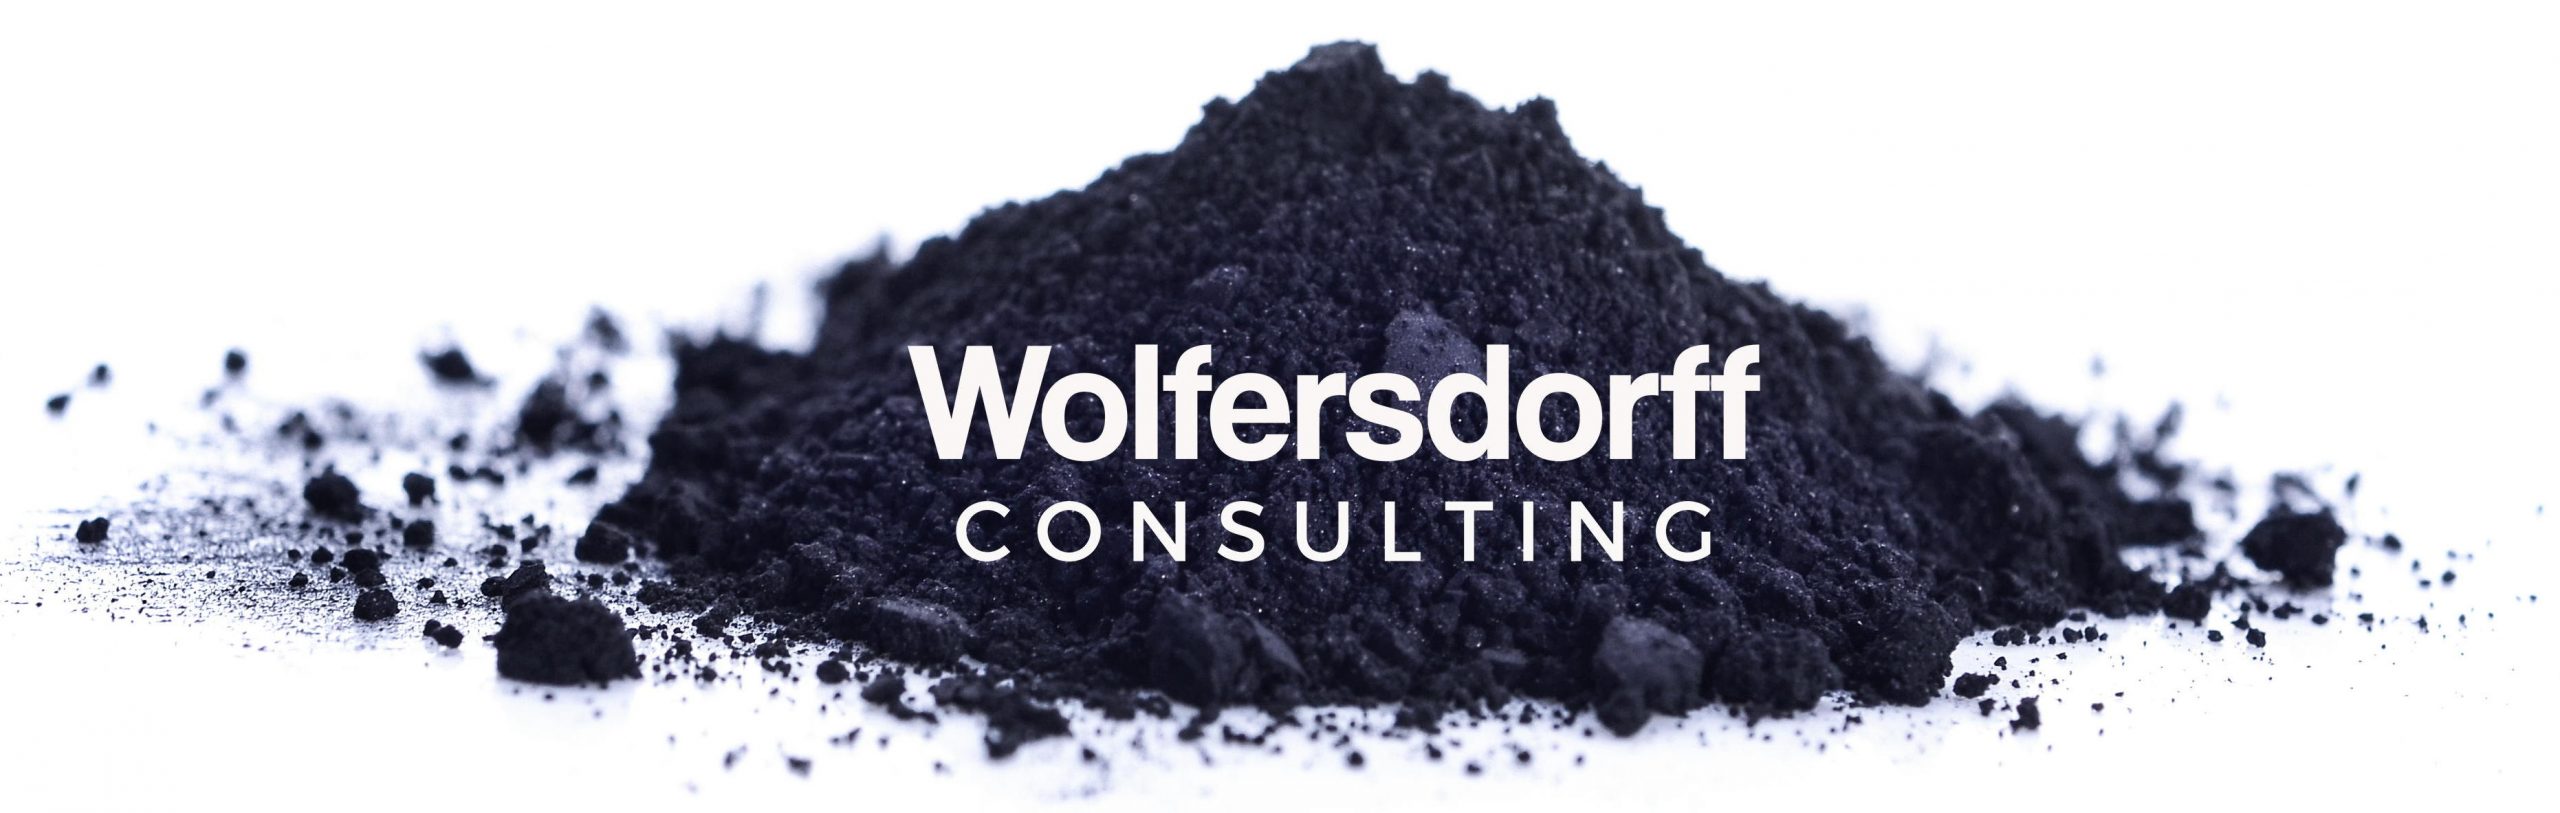 Wolfersdorff Consulting Berlin - recovered Carbon Black News April 2022